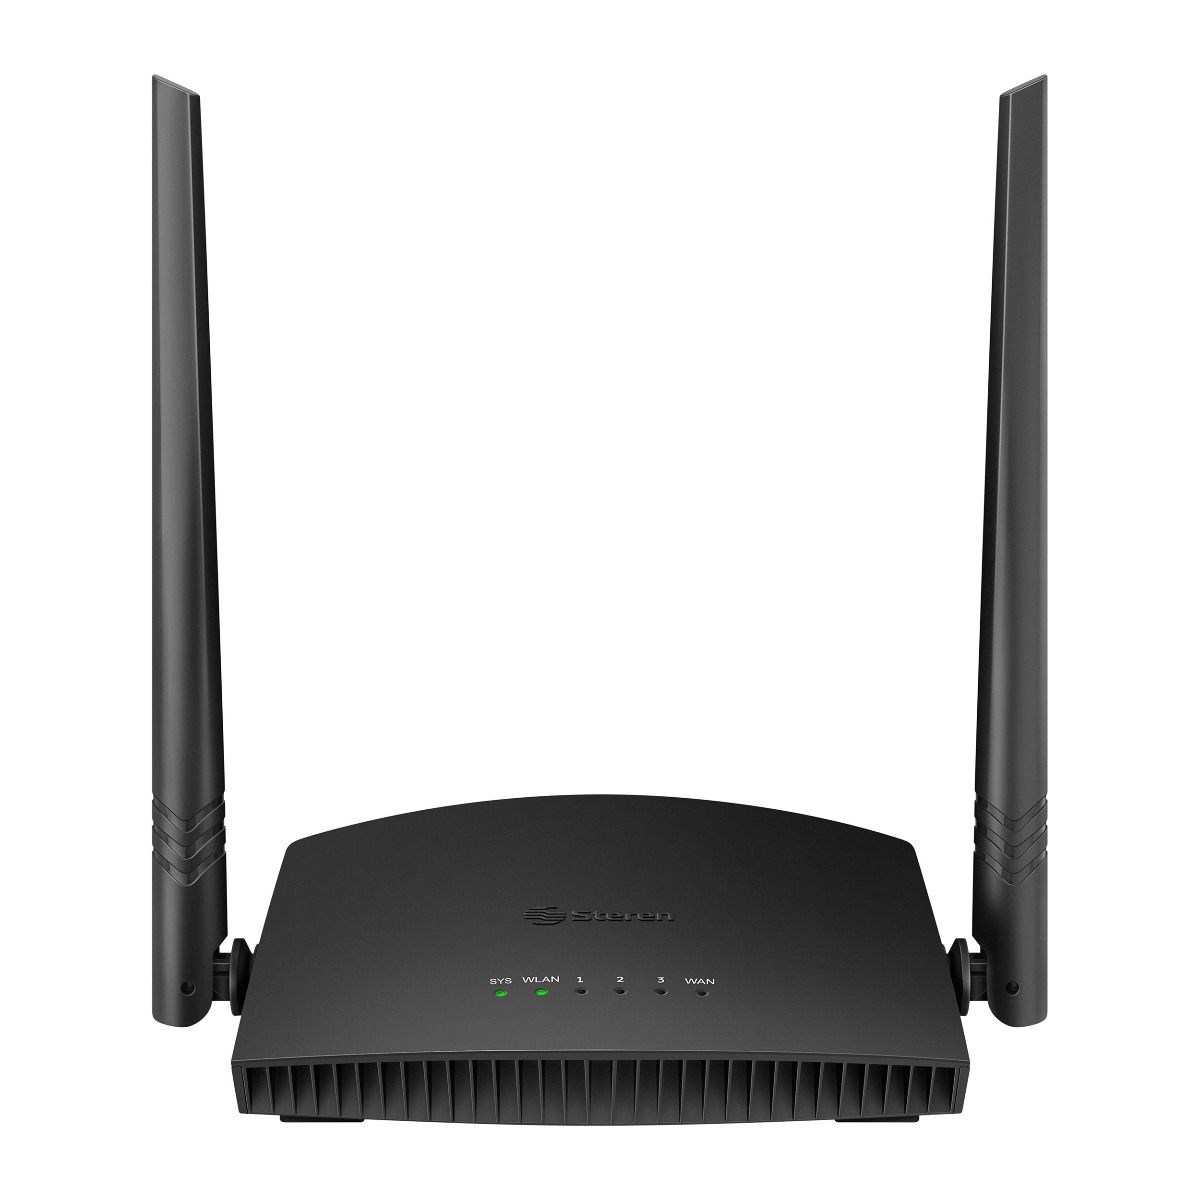 ROUTER 300 Mbps